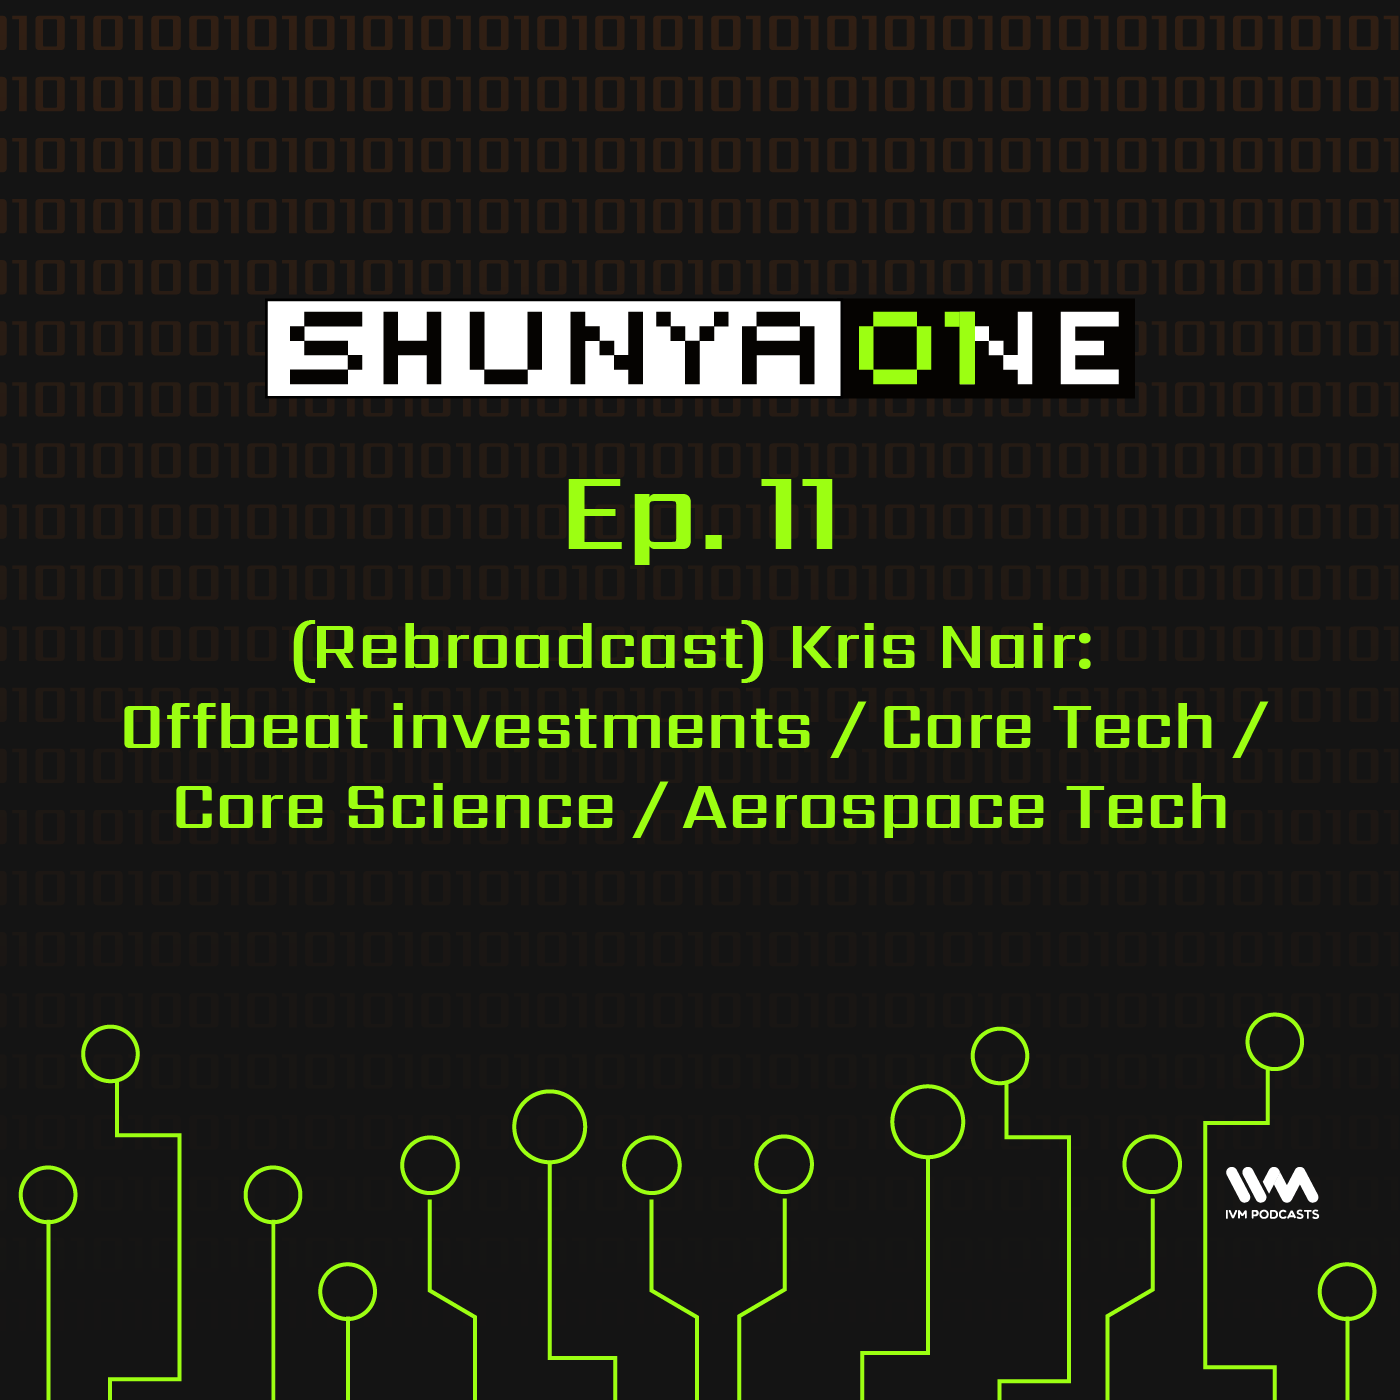 (Rebroadcast) Kris Nair: Offbeat investments / Core Tech / Core Science / Aerospace Tech